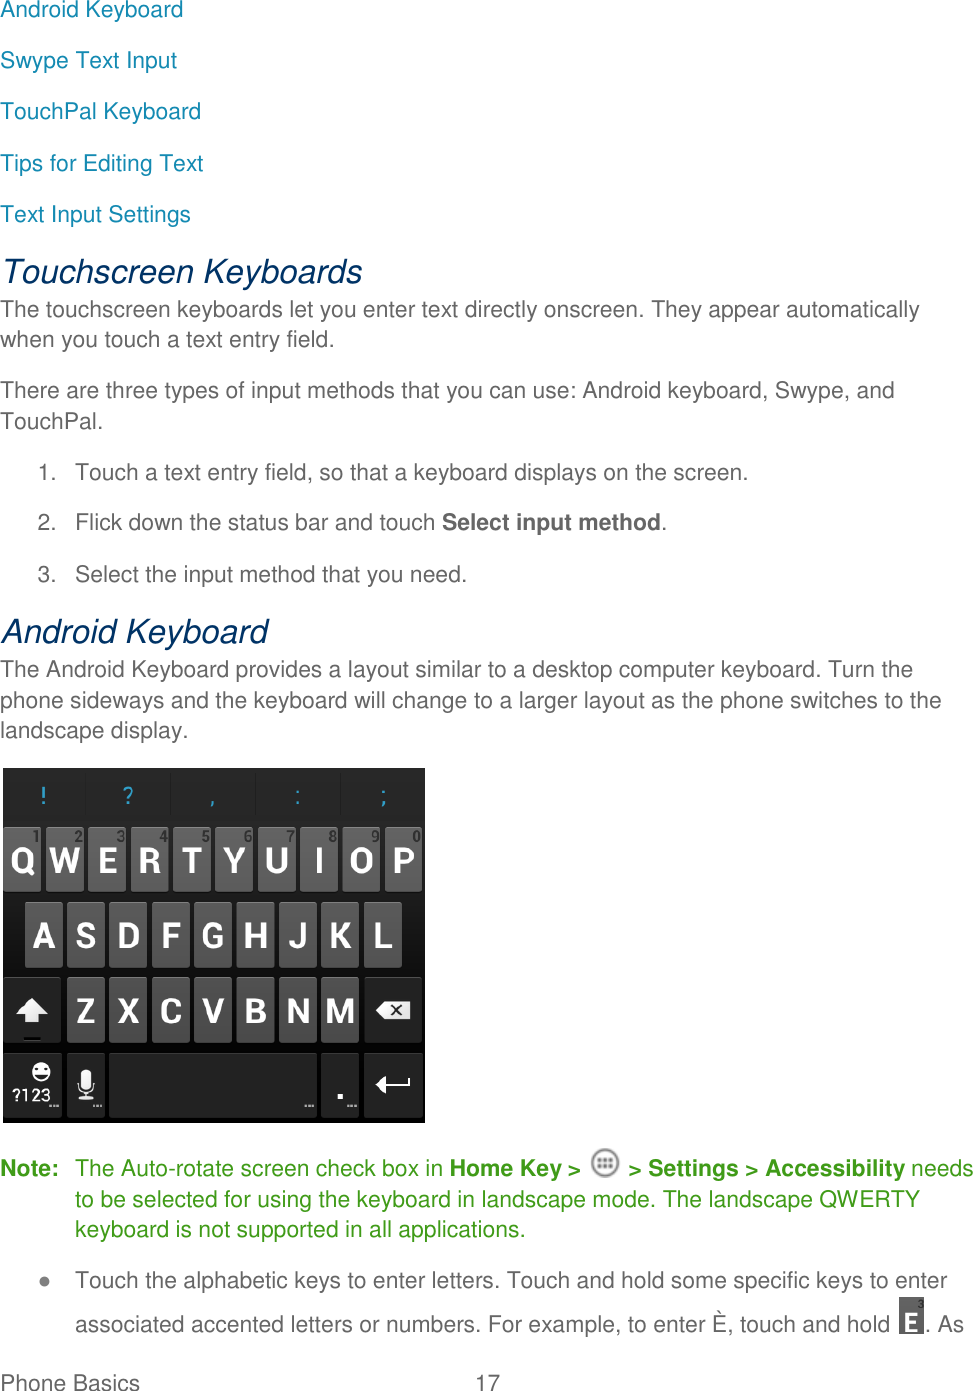 Phone Basics  17   Android Keyboard Swype Text Input TouchPal Keyboard Tips for Editing Text Text Input Settings Touchscreen Keyboards The touchscreen keyboards let you enter text directly onscreen. They appear automatically when you touch a text entry field. There are three types of input methods that you can use: Android keyboard, Swype, and TouchPal. 1.  Touch a text entry field, so that a keyboard displays on the screen. 2.  Flick down the status bar and touch Select input method. 3.  Select the input method that you need. Android Keyboard The Android Keyboard provides a layout similar to a desktop computer keyboard. Turn the phone sideways and the keyboard will change to a larger layout as the phone switches to the landscape display.  Note:  The Auto-rotate screen check box in Home Key &gt;   &gt; Settings &gt; Accessibility needs to be selected for using the keyboard in landscape mode. The landscape QWERTY keyboard is not supported in all applications. ● Touch the alphabetic keys to enter letters. Touch and hold some specific keys to enter associated accented letters or numbers. For example, to enter È, touch and hold  . As 